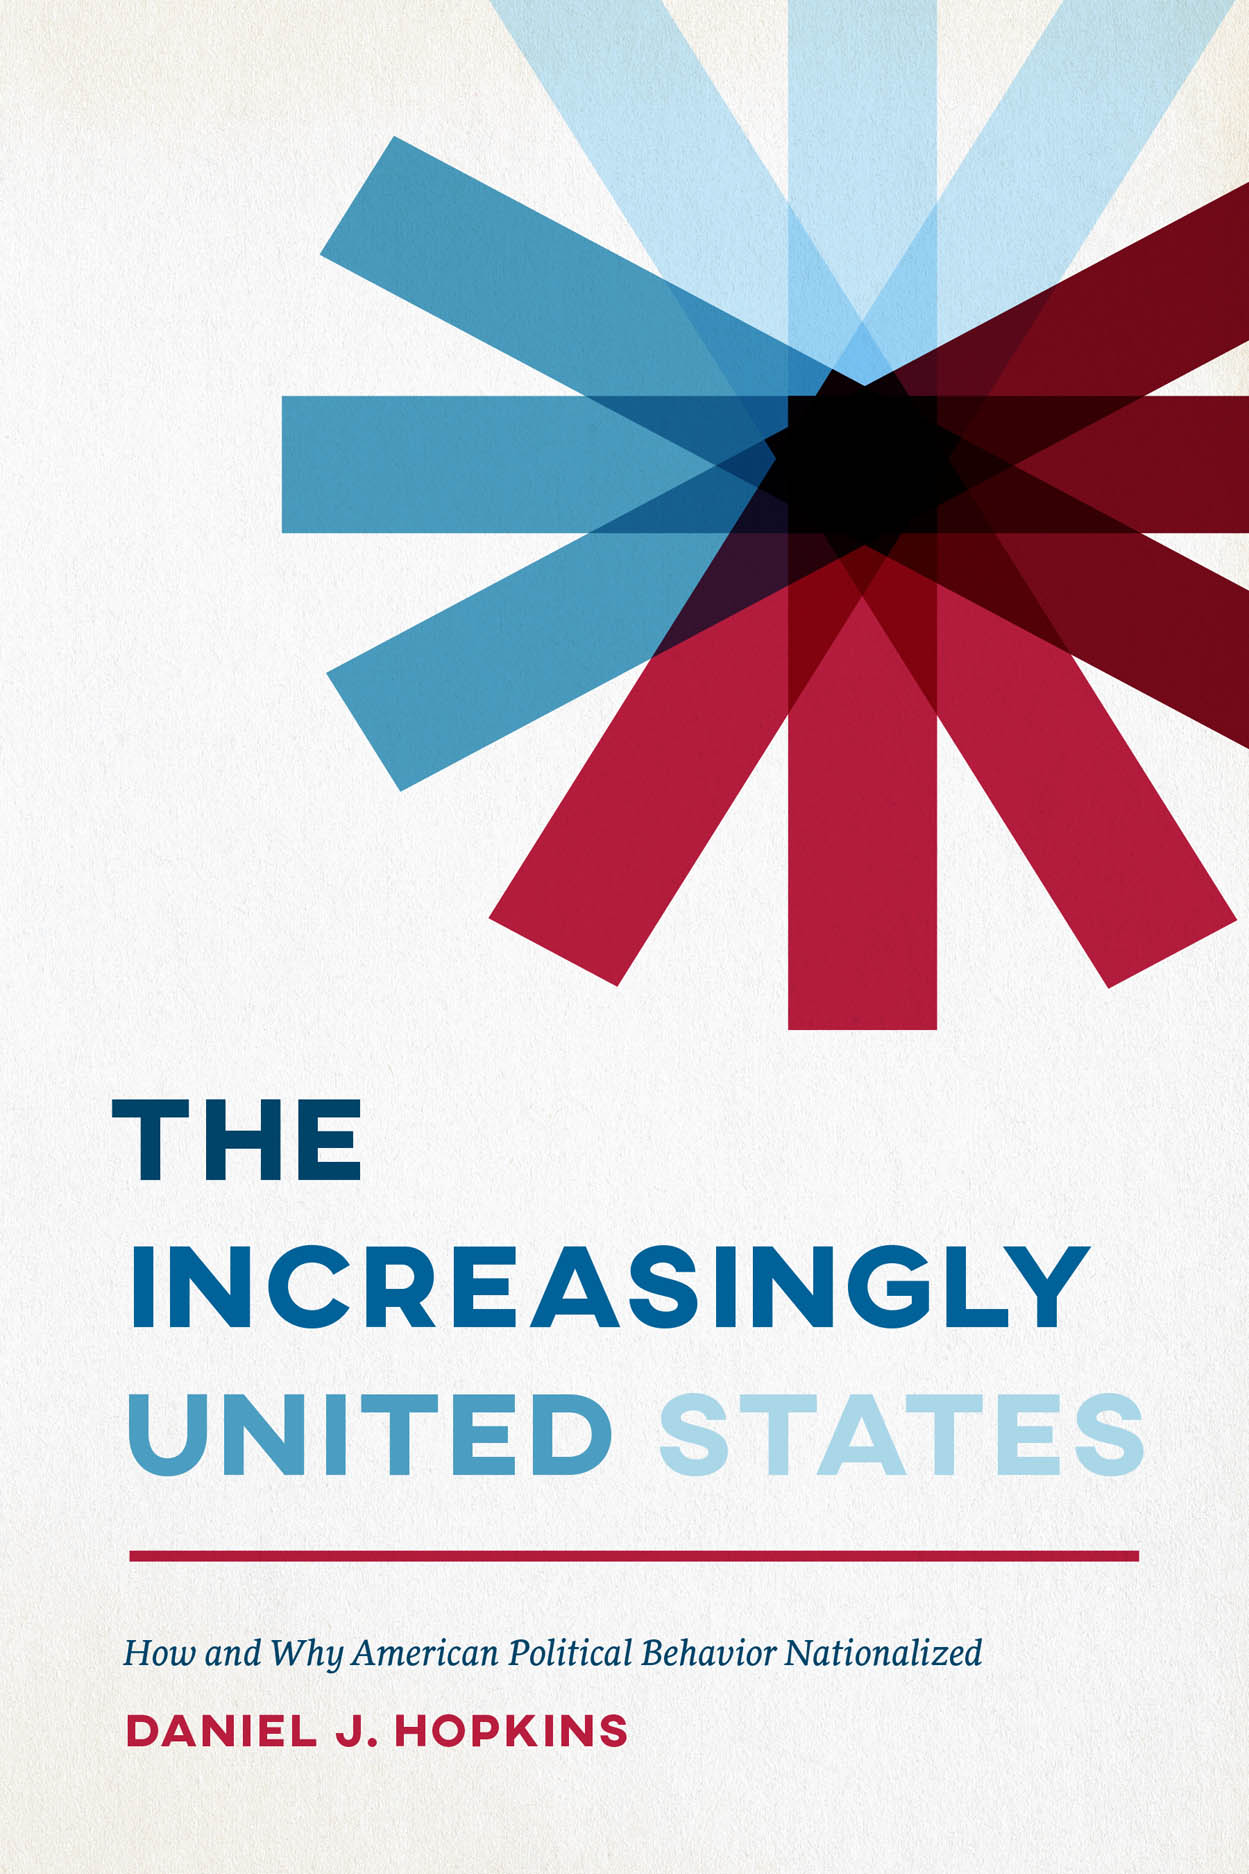 The Increasingly United States: How and Why American Political Behavior NationalizedThe Increasingly United States: How and Why American Political Behavior Nationalized